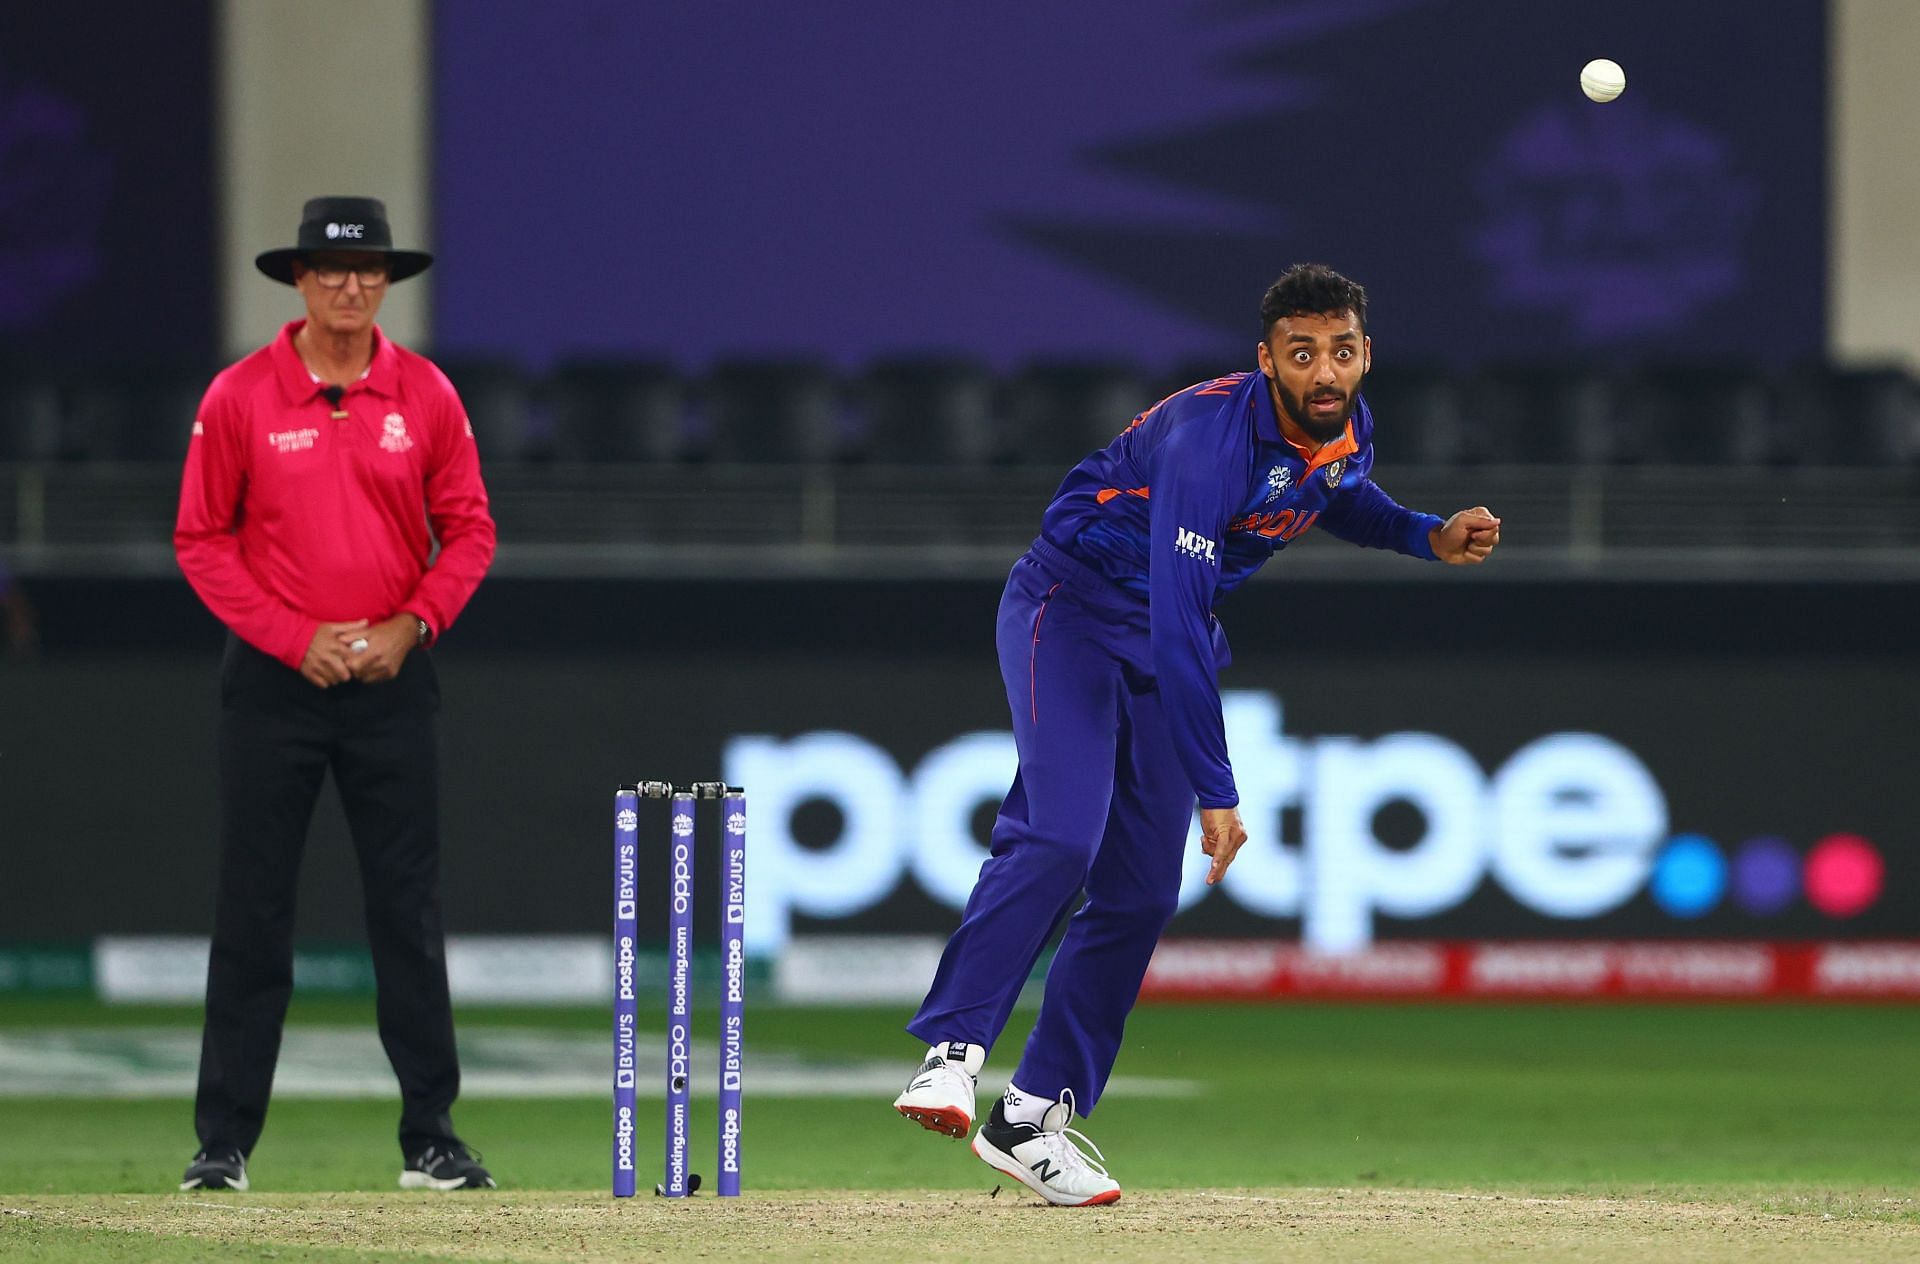 Varun Chakravarthy bowling during the 2021 T20 World Cup. (Pic: Getty Images)